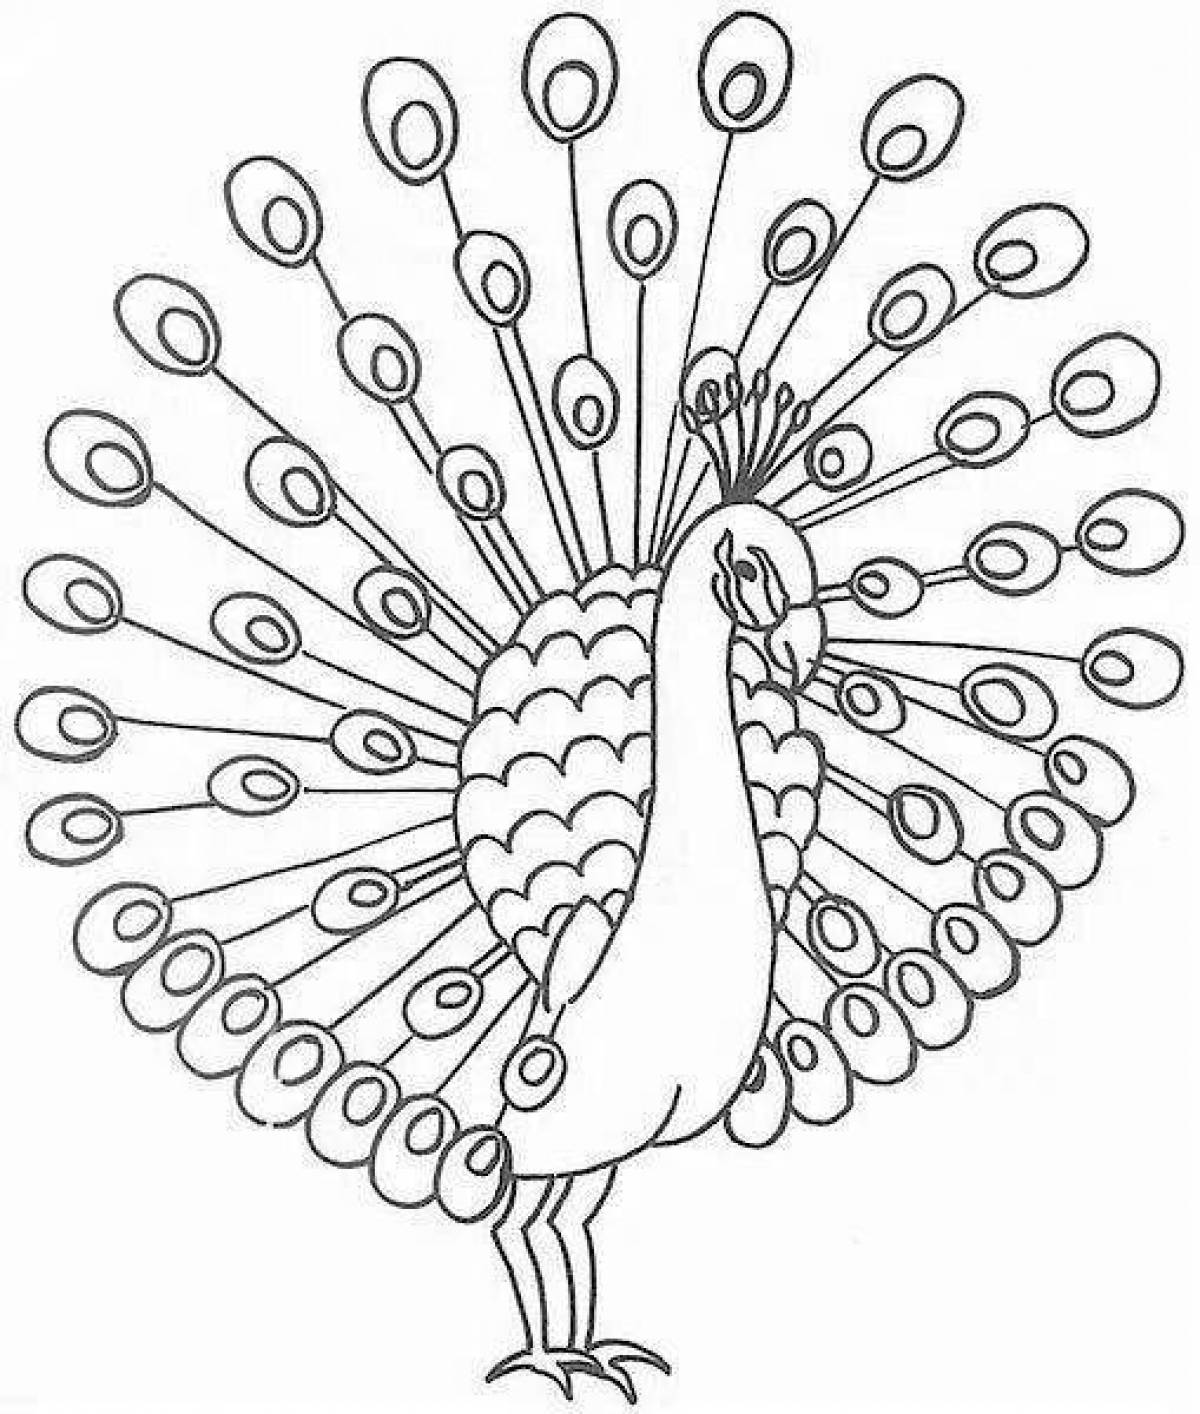 Awesome peacock coloring page with loose tail